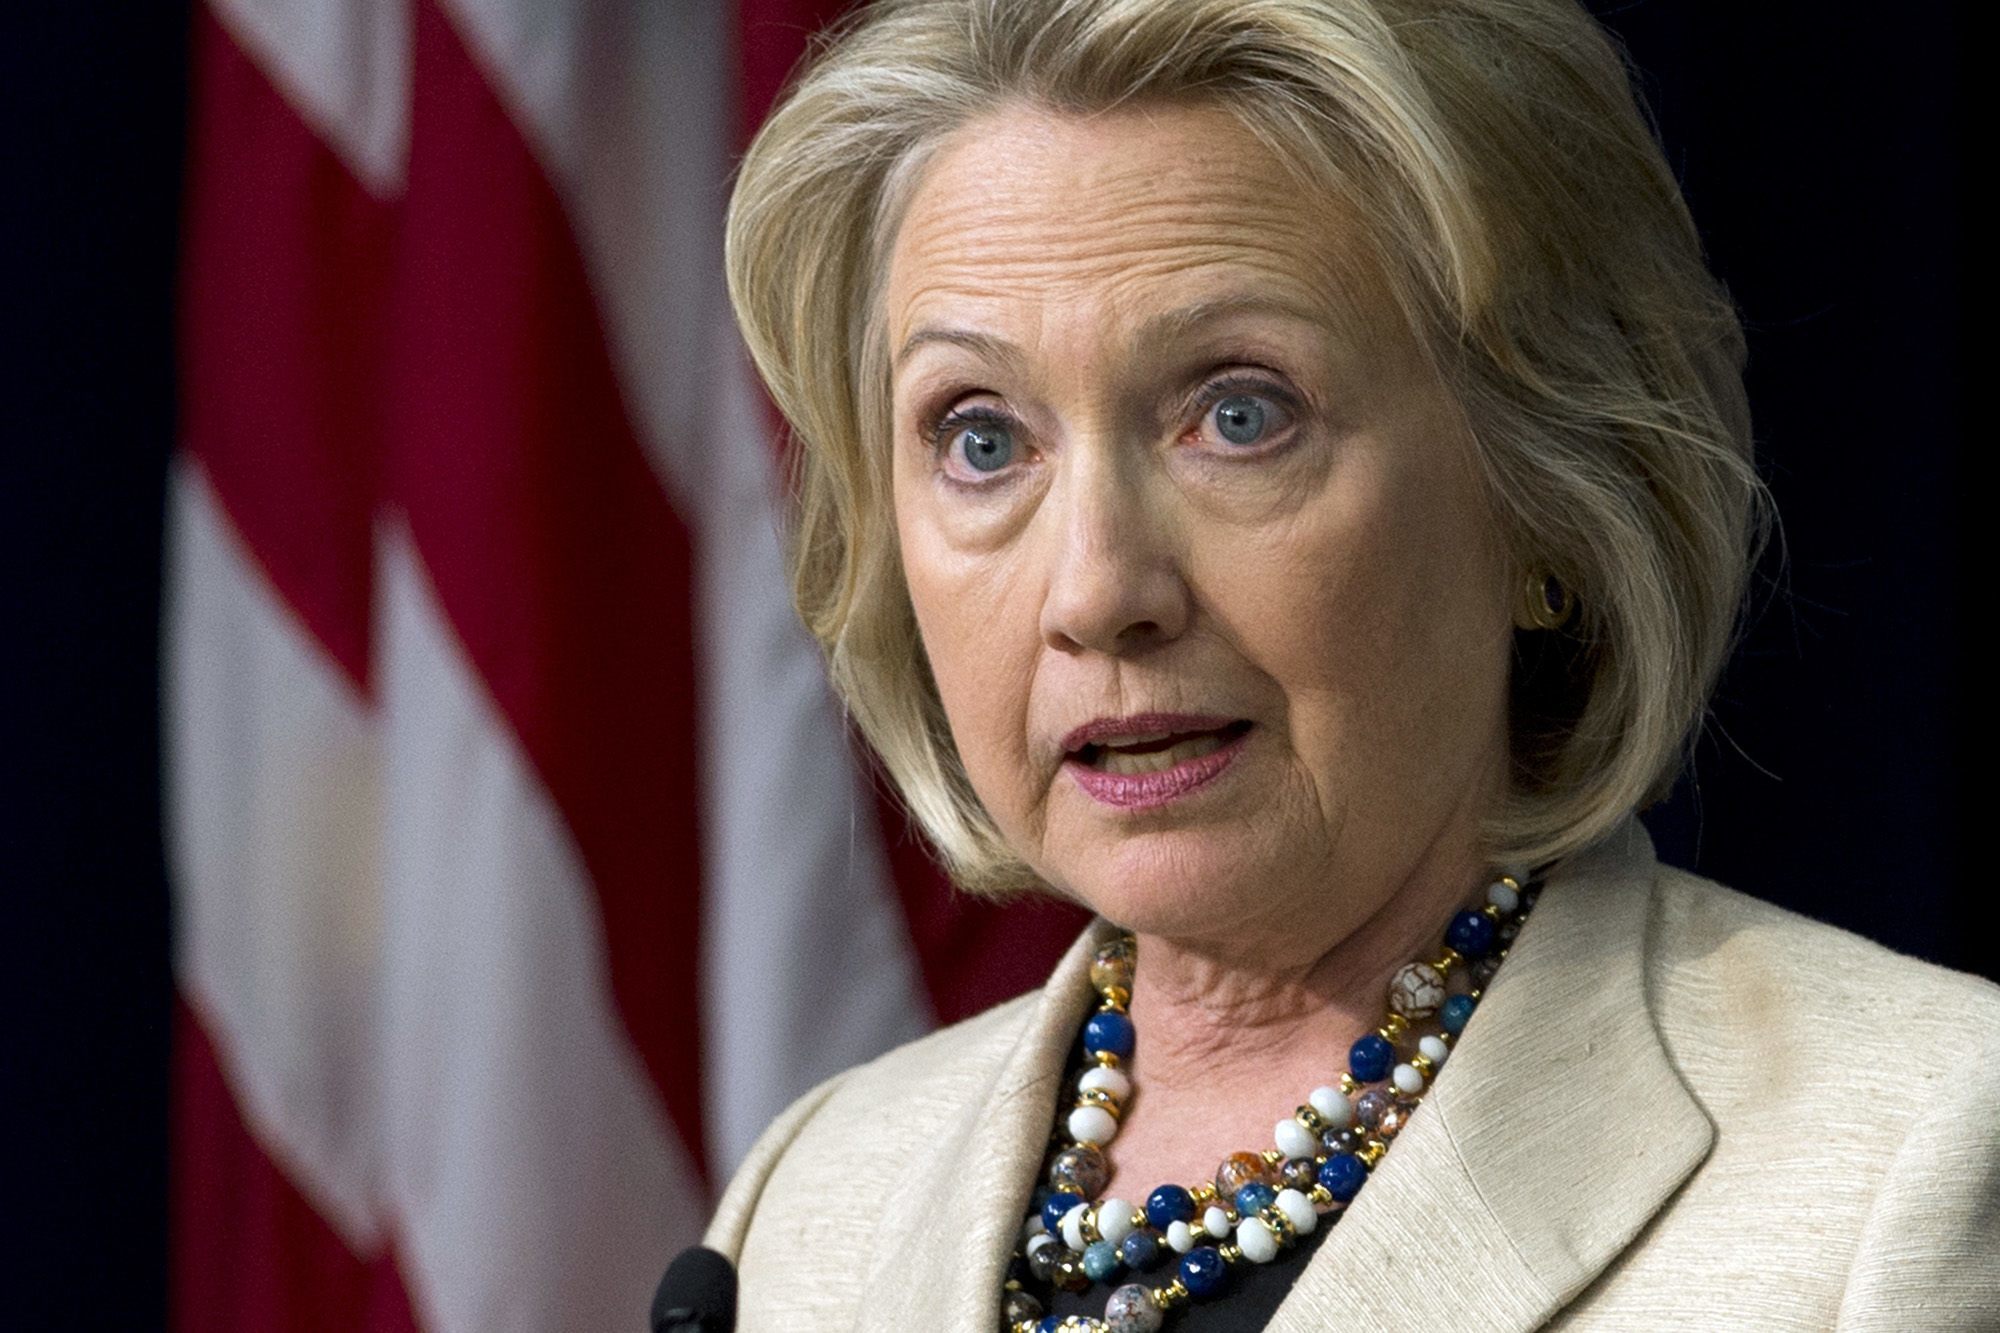 Hillary Clinton Enters 2016 Presidential Race at Front of Democratic Pack